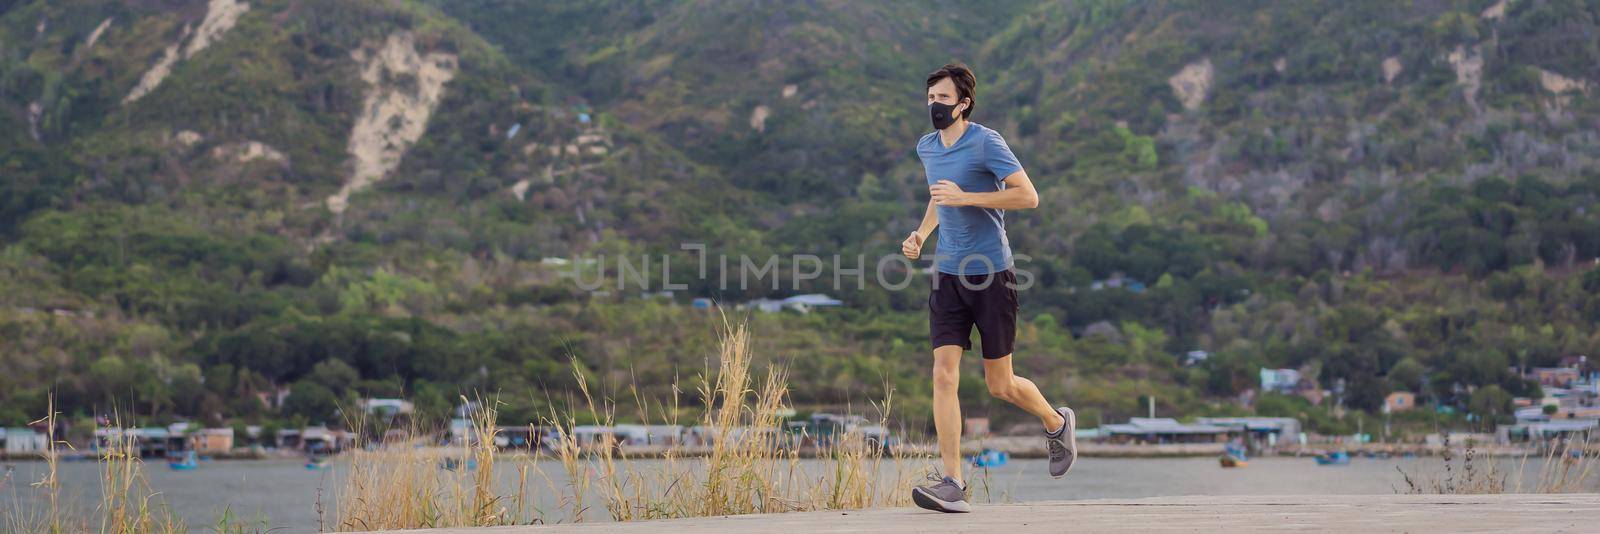 Runner wearing medical mask, Coronavirus pandemic Covid-19. Sport, Active life in quarantine surgical sterilizing face mask protection. Outdoor run on athletics track in Corona Outbreak BANNER, LONG FORMAT by galitskaya